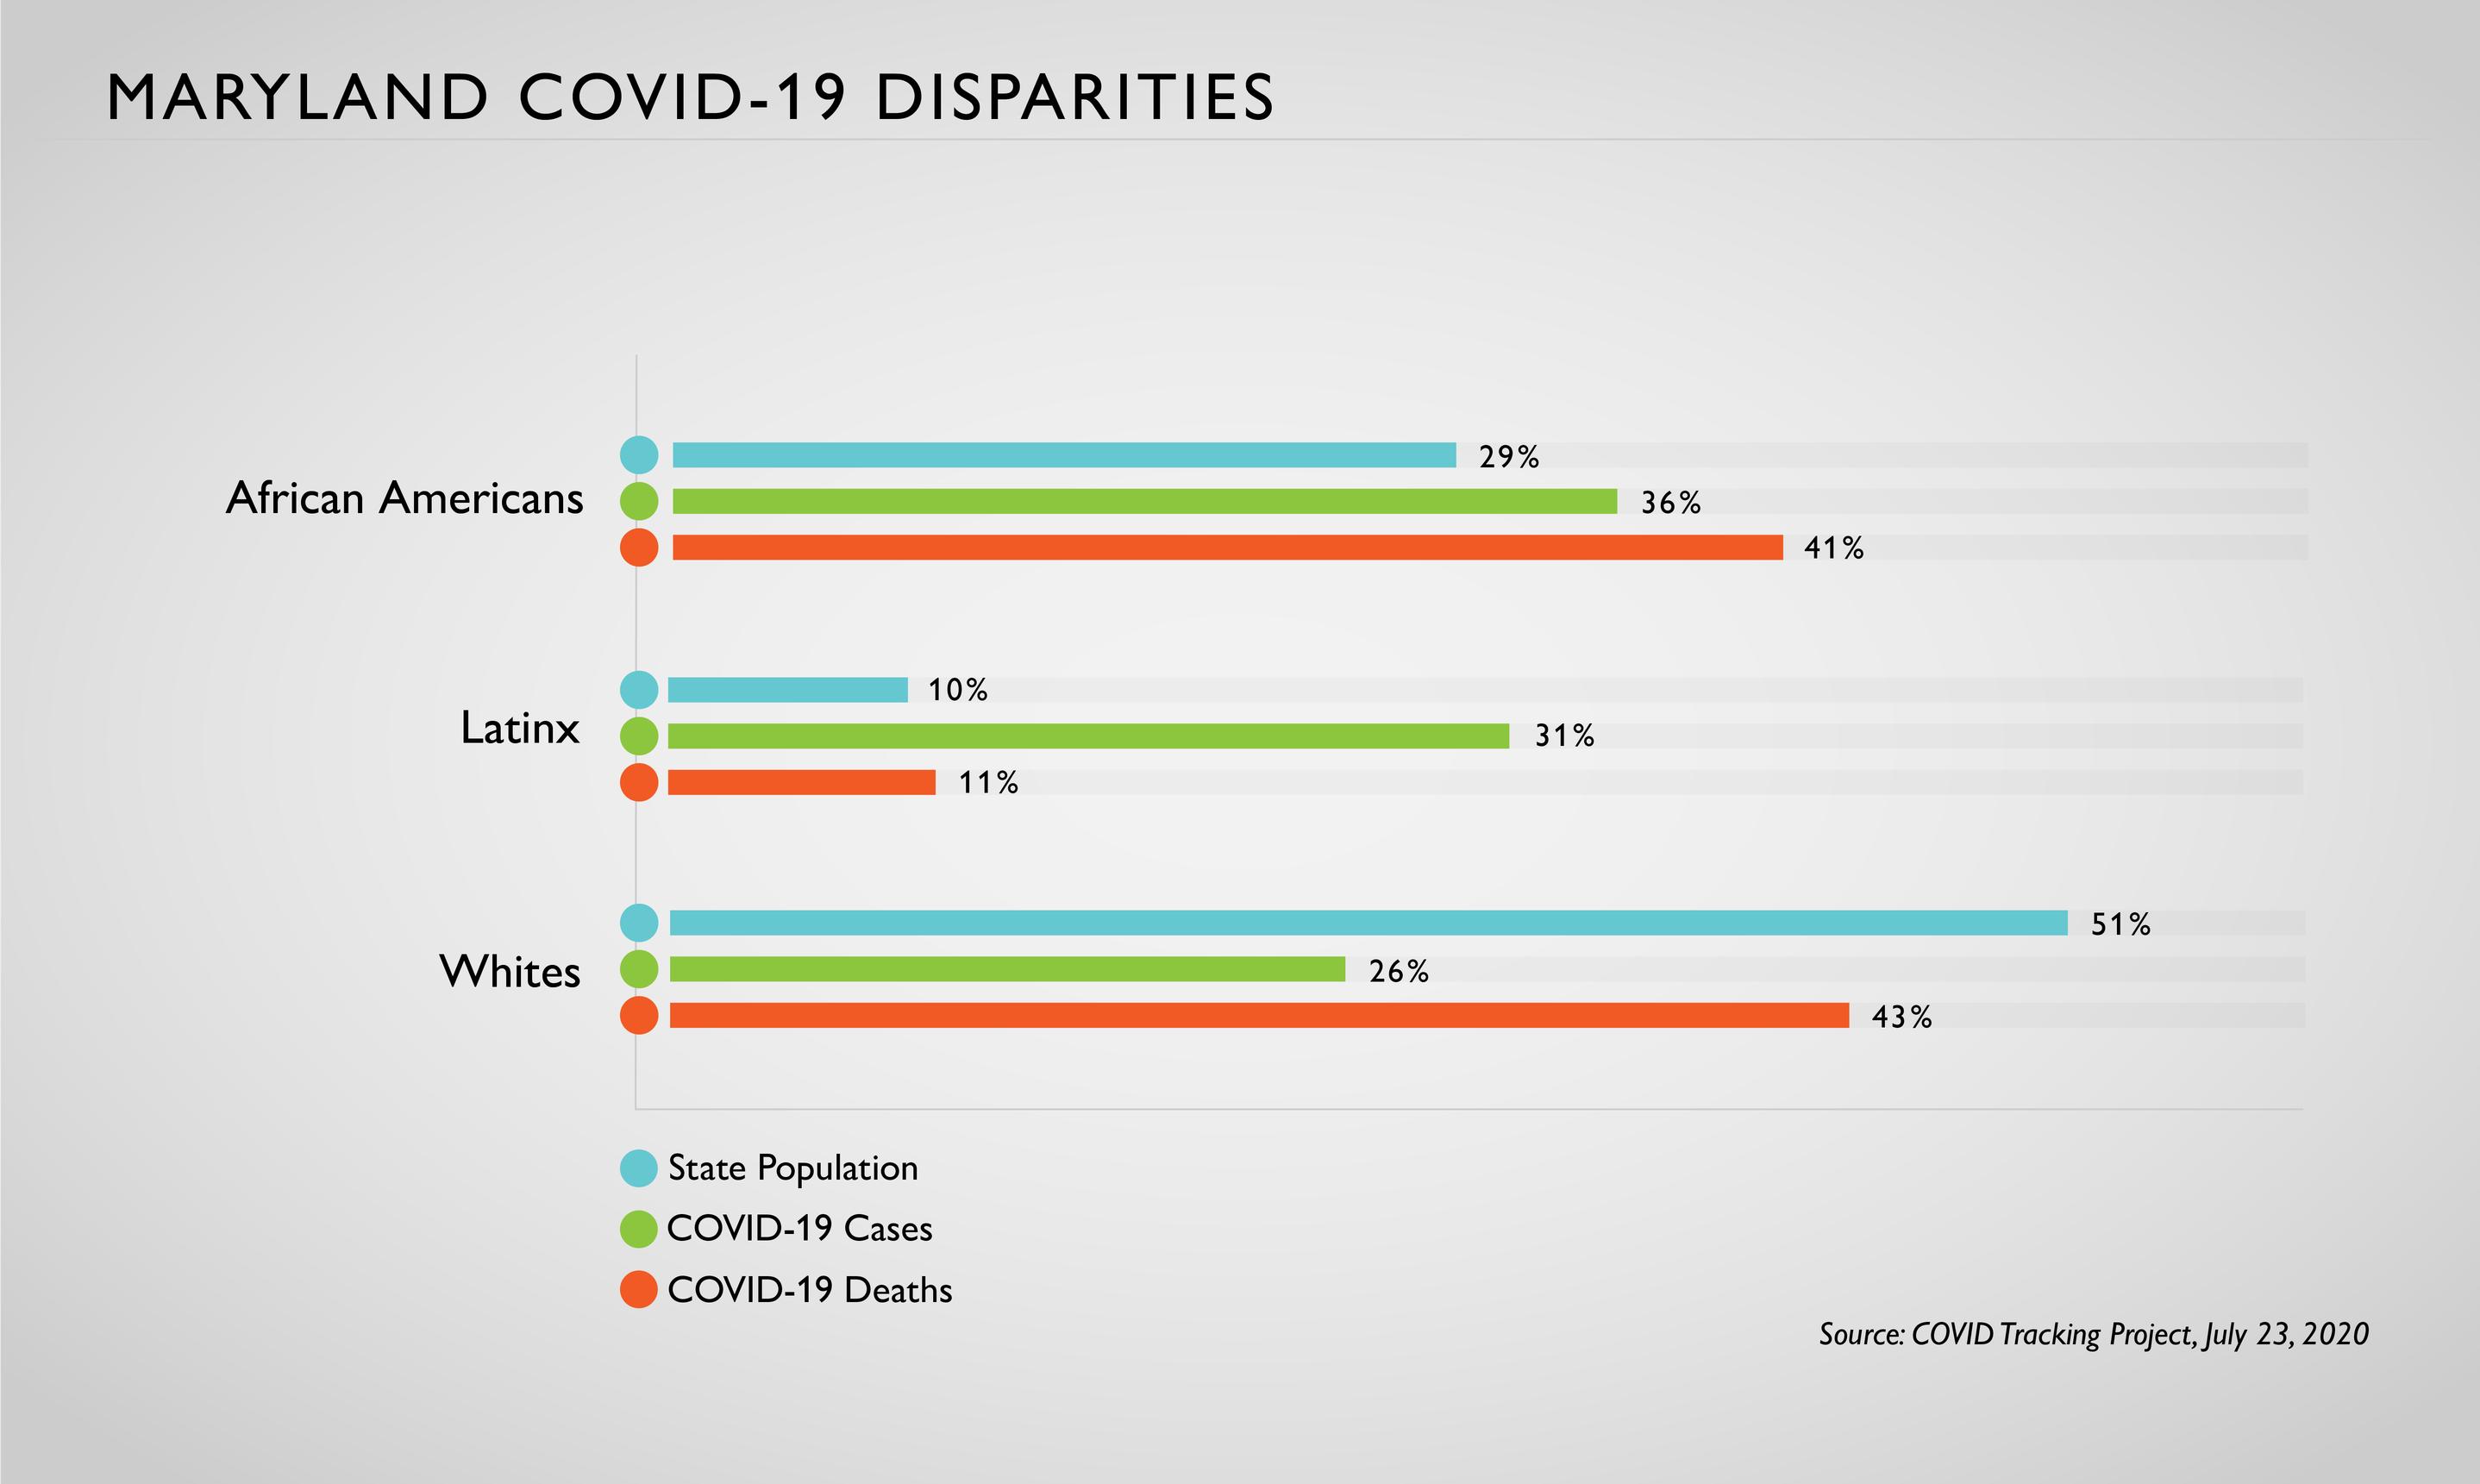 Infographic showing populations, COVID cases and COVID deaths for African Americans, Latinx and Whites. 